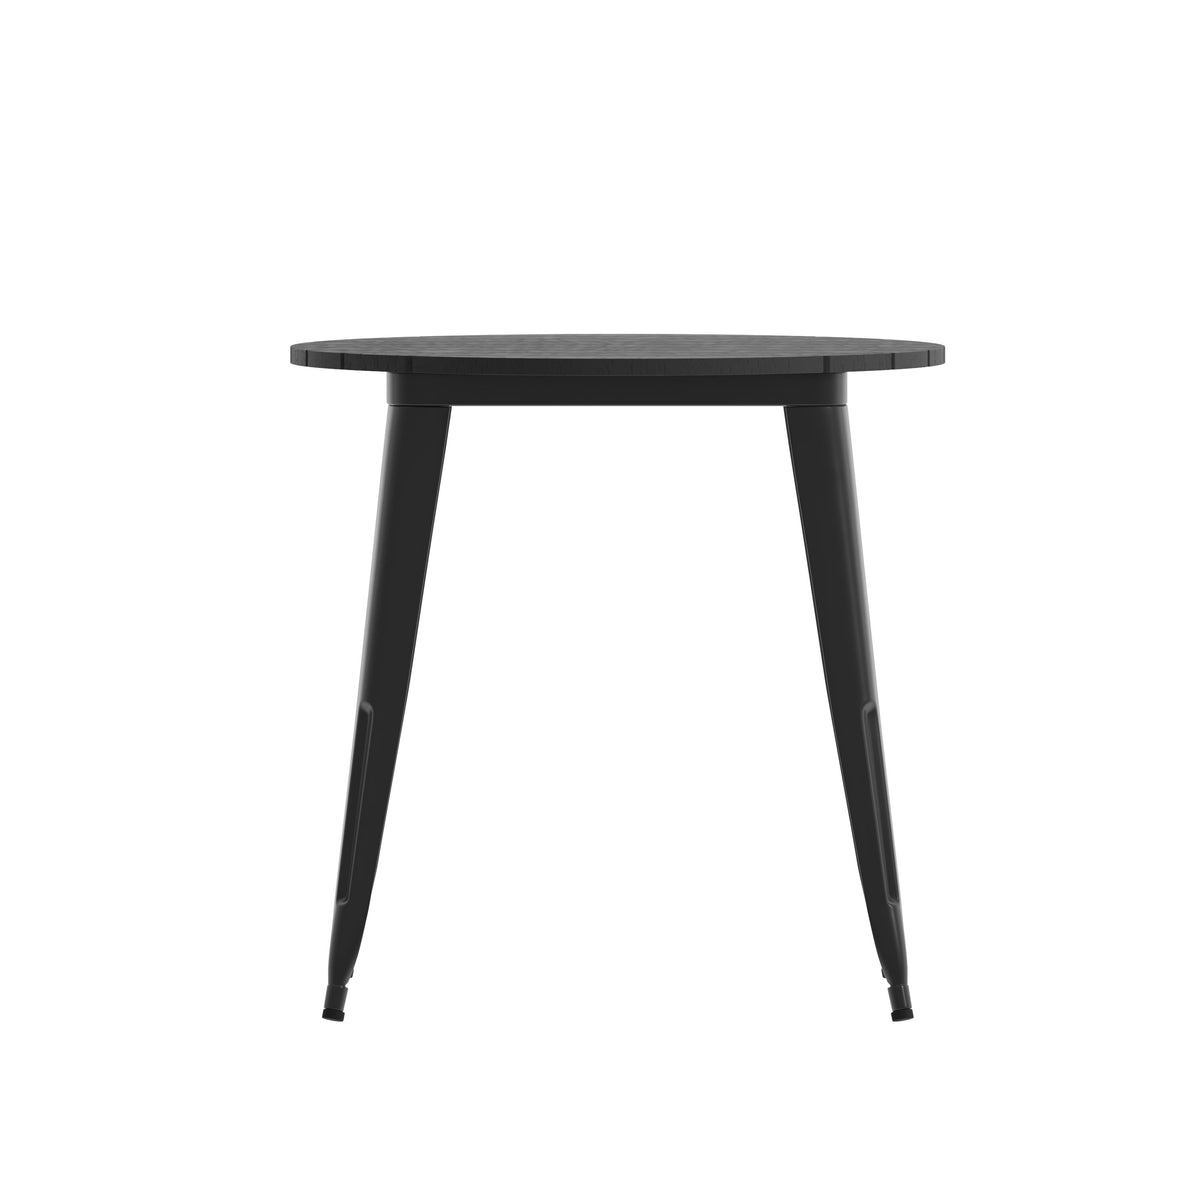 Black |#| 30inch RD Commercial Poly Resin Restaurant Table with Steel Frame-Black/Black